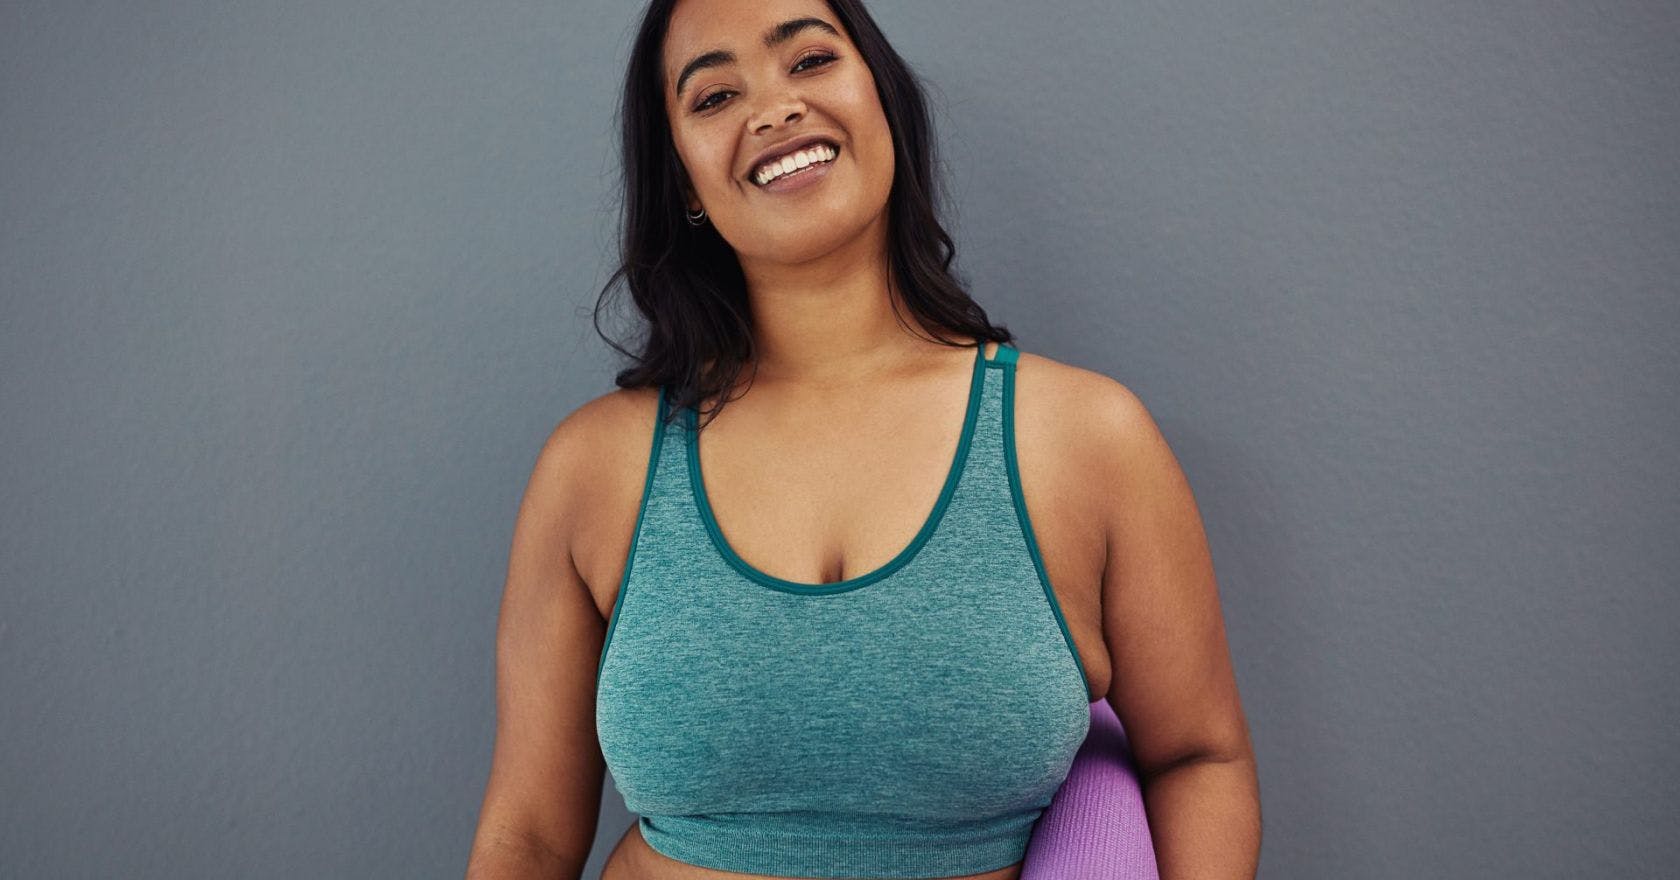 How to improve body image in fitness: wear a sports bra